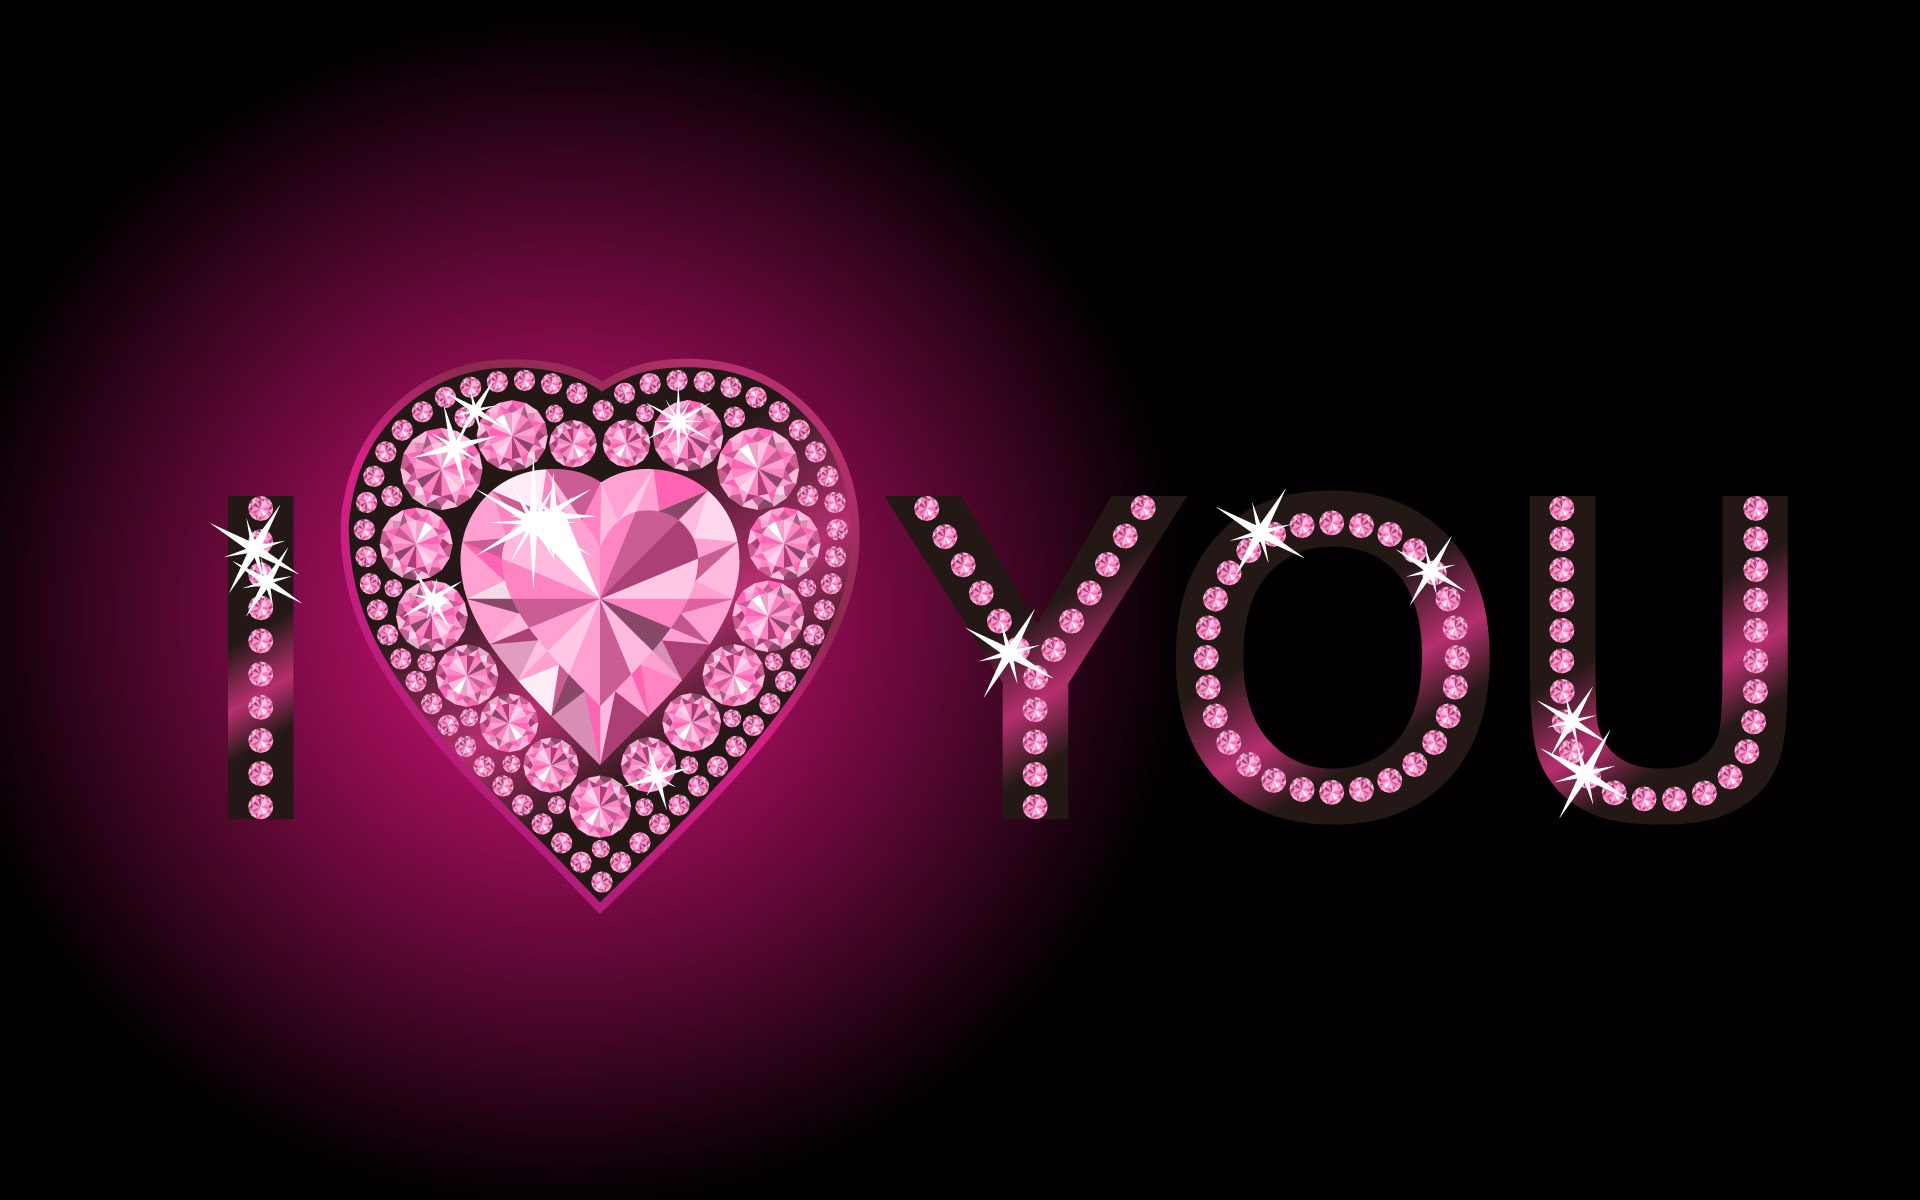 Valentine's Day Love Theme Wallpapers #21 - 1920x1200